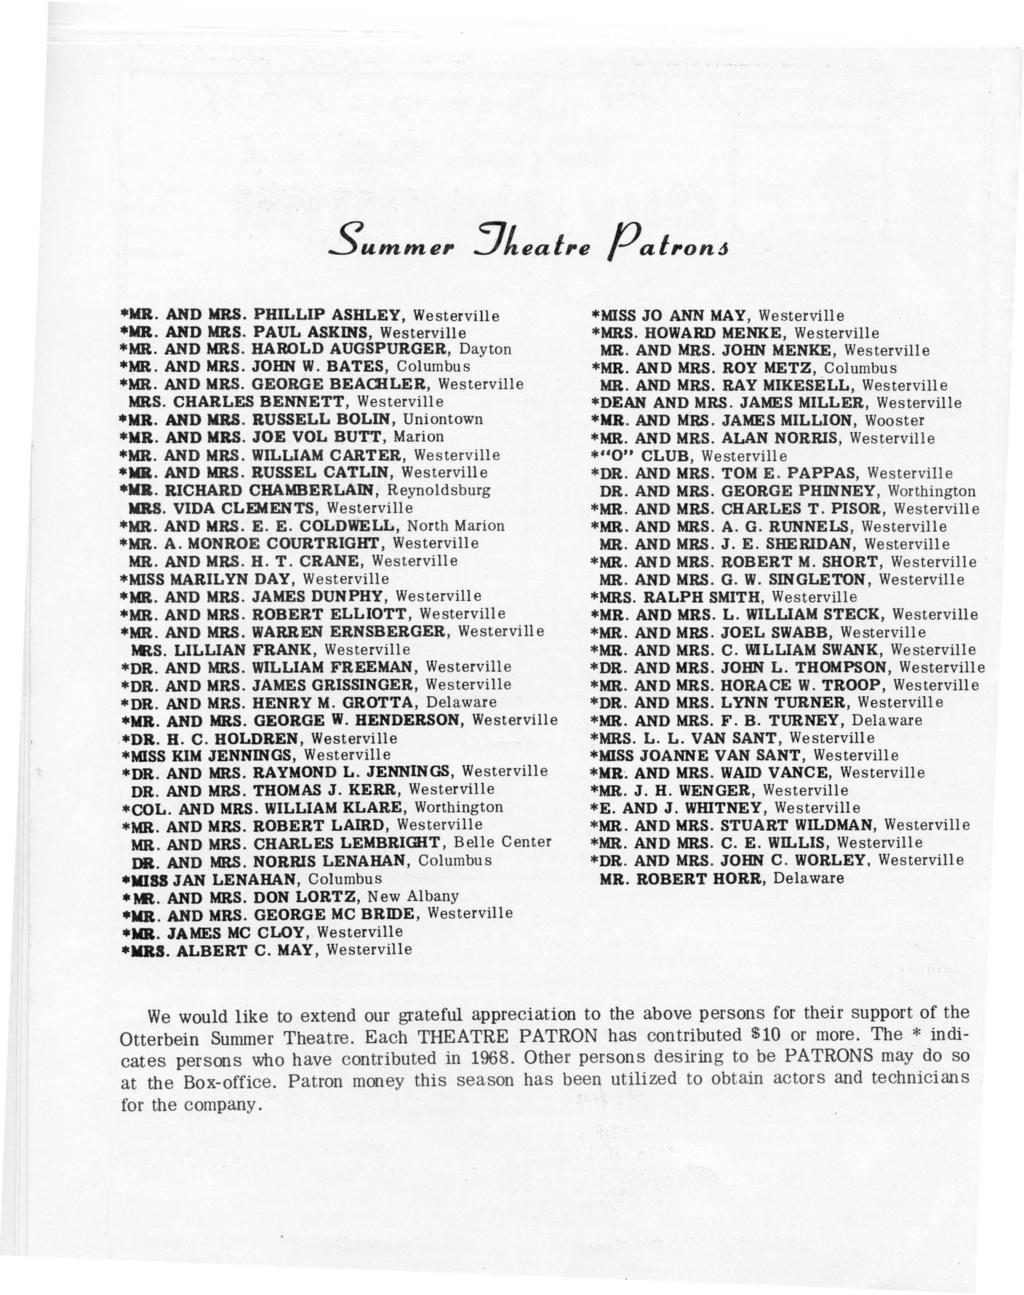 Summer :Jhealre P alron6 MR. AND MKS. PHILLIP ASHLEY, Westerville *MR. AND MRS. PAUL ASKINS, Westerville *MR. AND MRS. HAROLD AUGSPURGER, Dayton *MR. AND MRS. JOHN W. BATES, Columbus *MR. AND MRS. GEORGE BEACHLER, Westerville MRS.